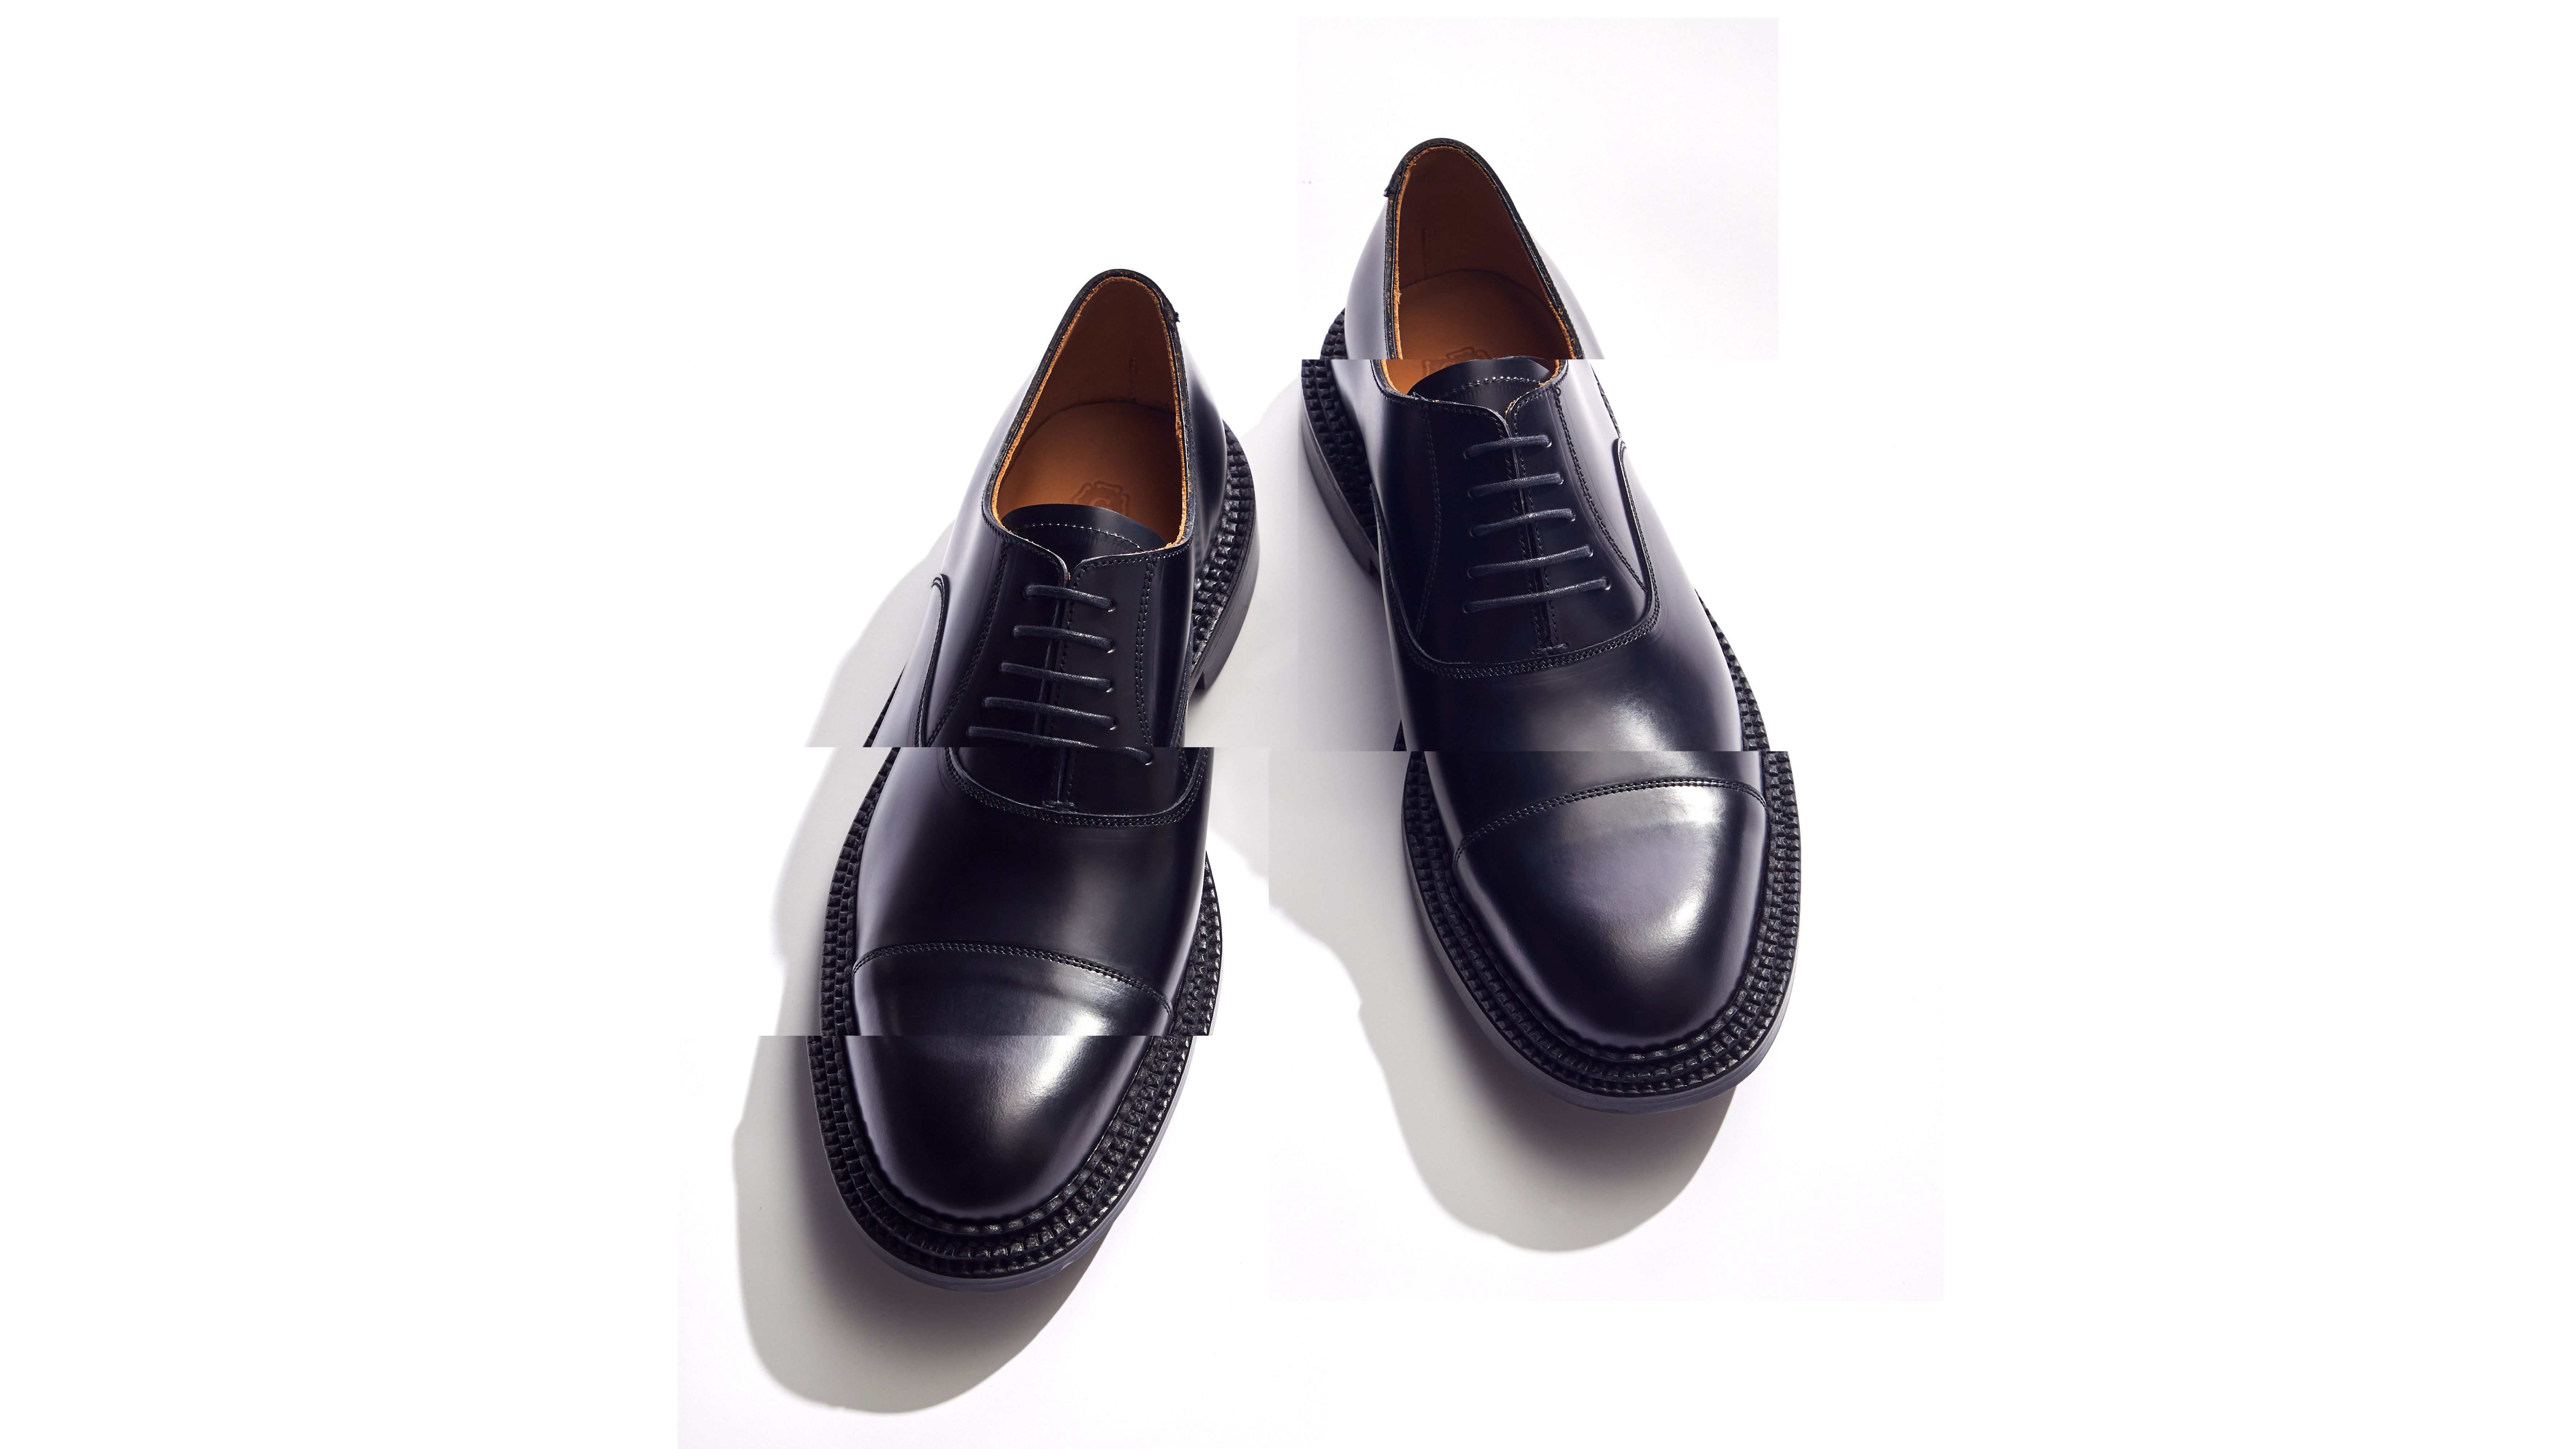 Grenson's Bold, Beefed-Up Oxfords Are the Answer to Boring ...